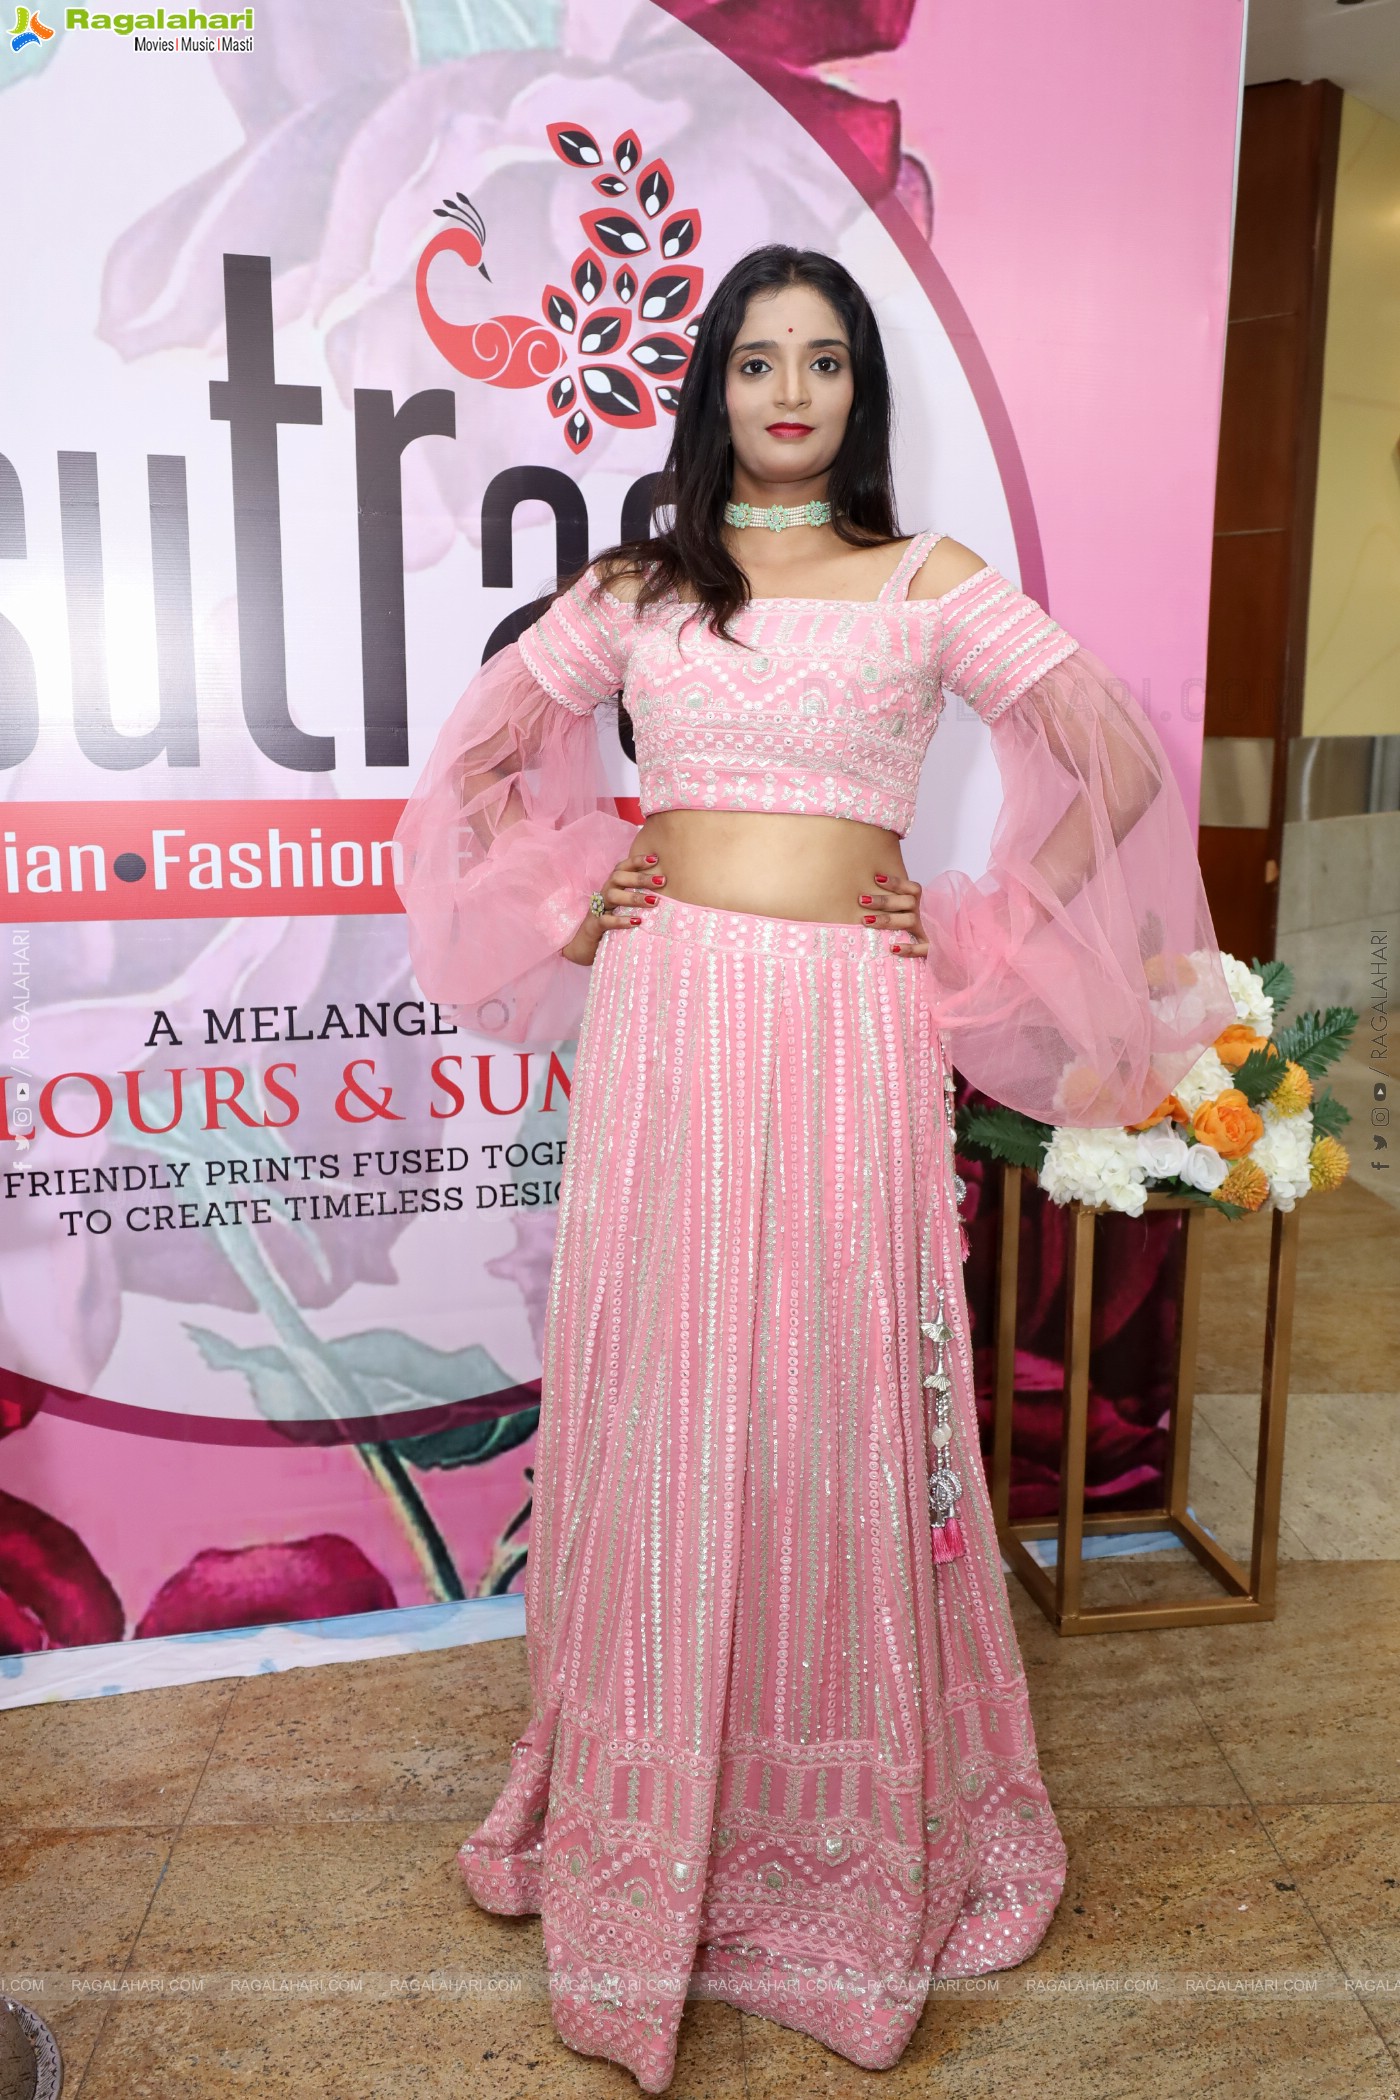 Sutraa Exhibition, Hyderabad inaugurated by Rithu Chowdary